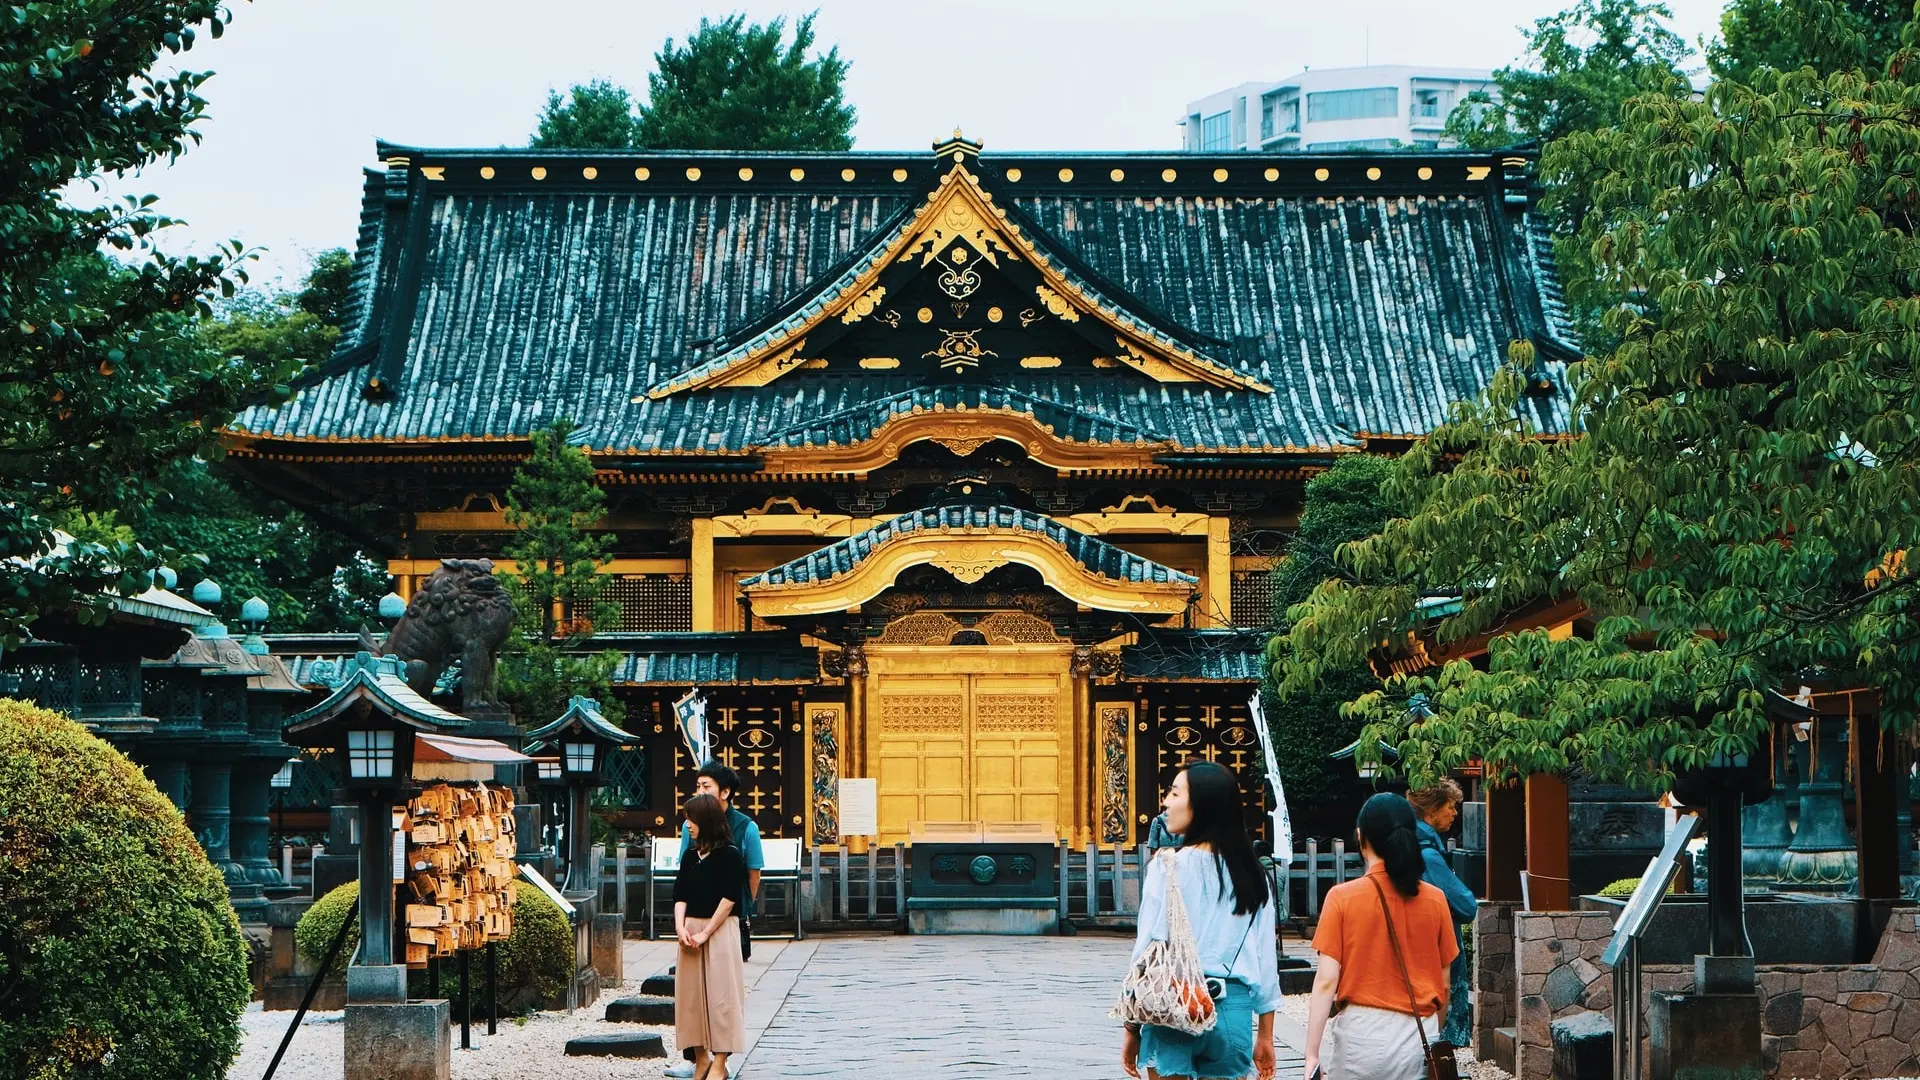 Black and gold yellow coloured temple with trees surrounding, the Toshugu Jinja Shrine at Ueno Park.